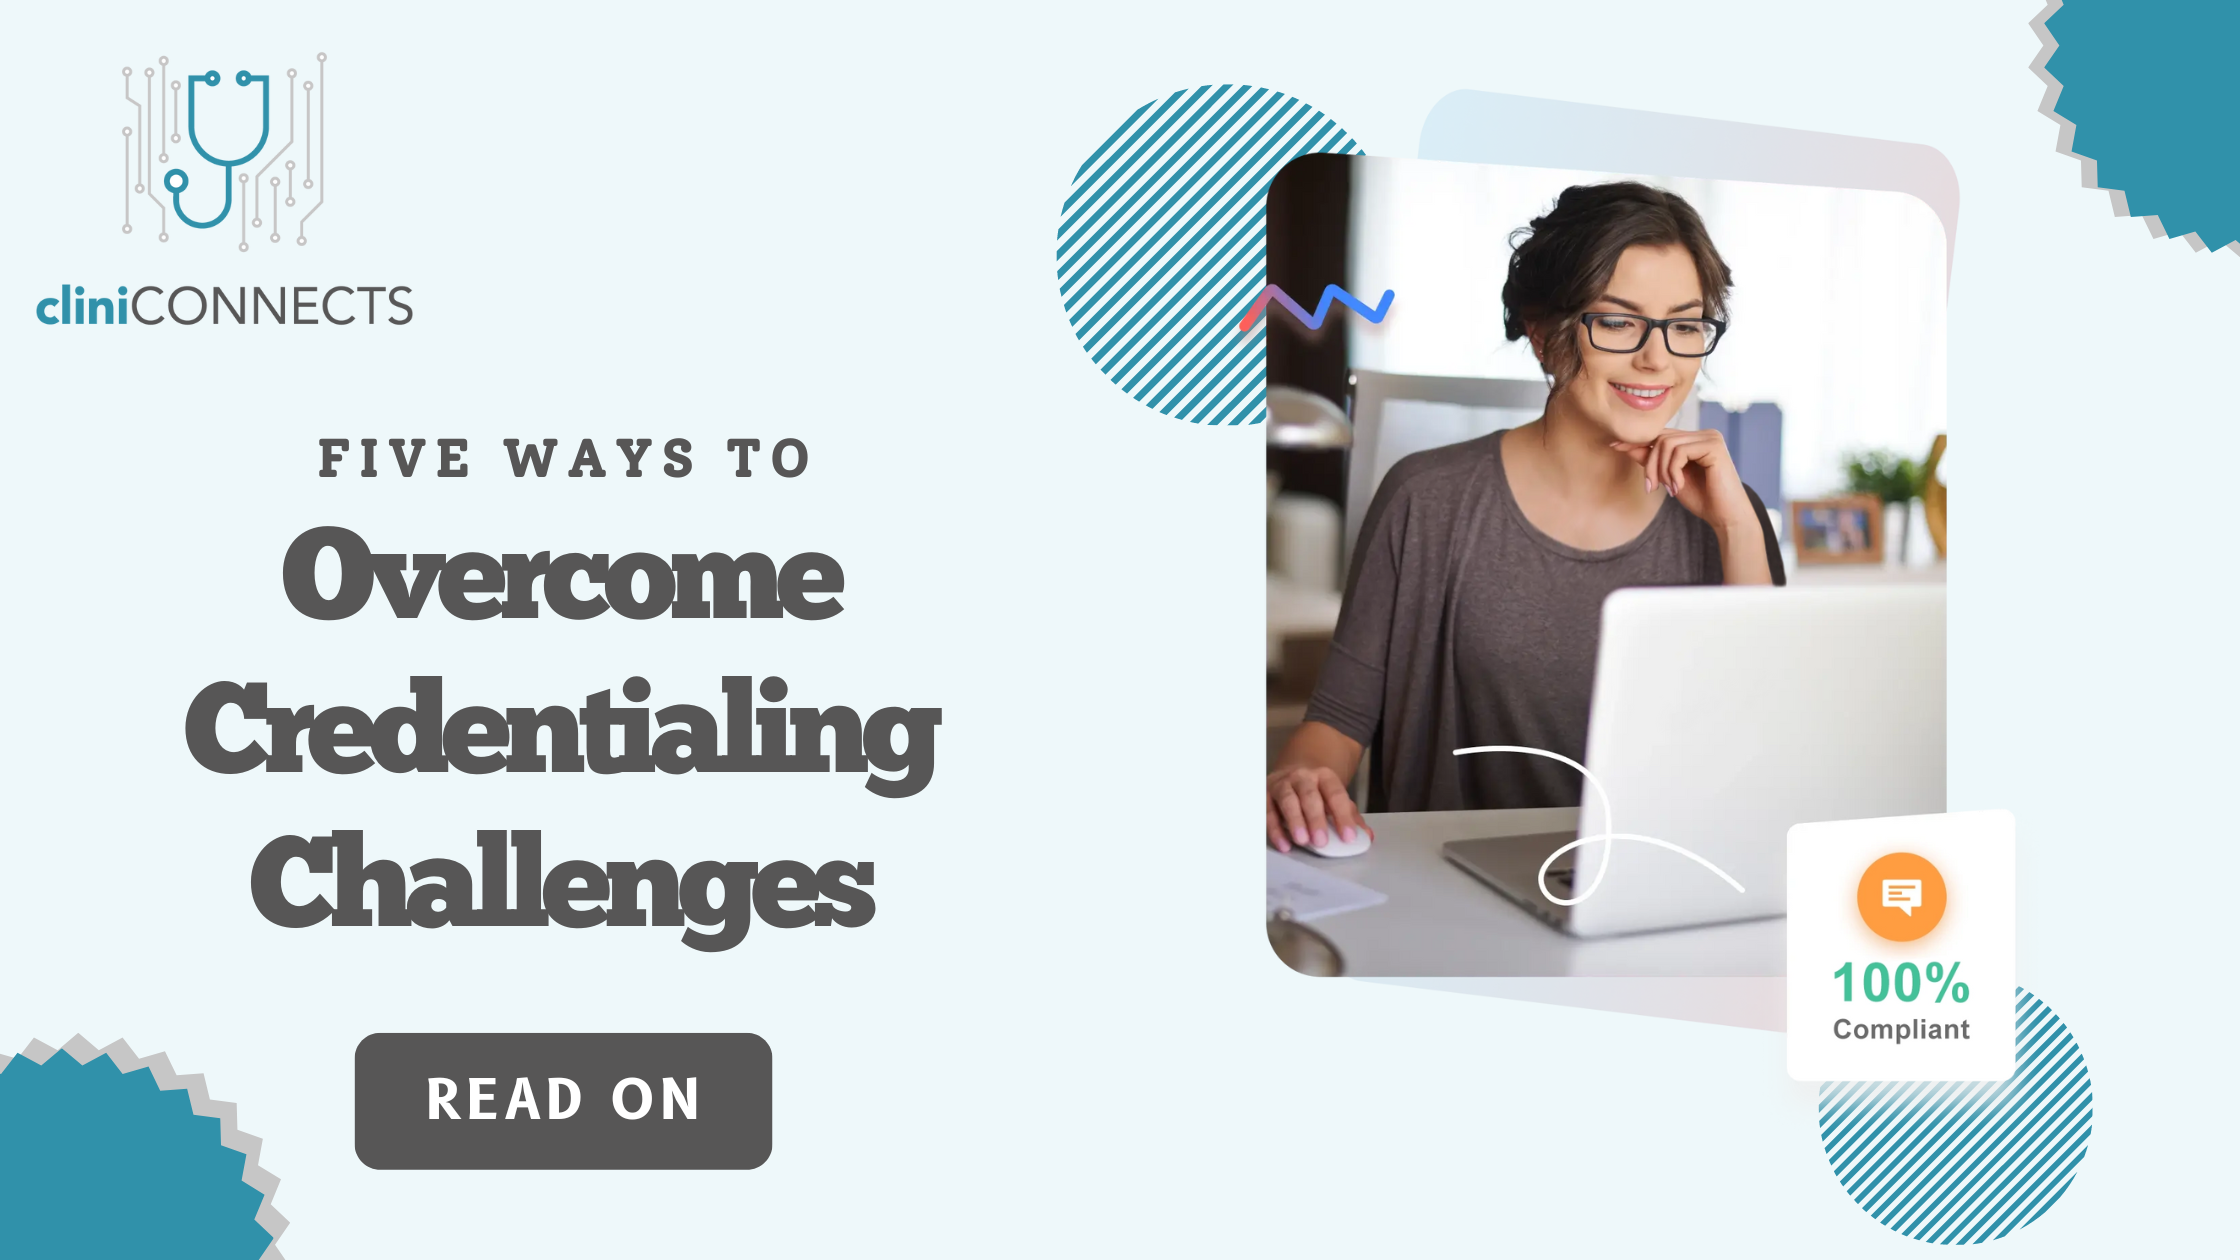 Five Ways to Overcome Credentialing Challenges